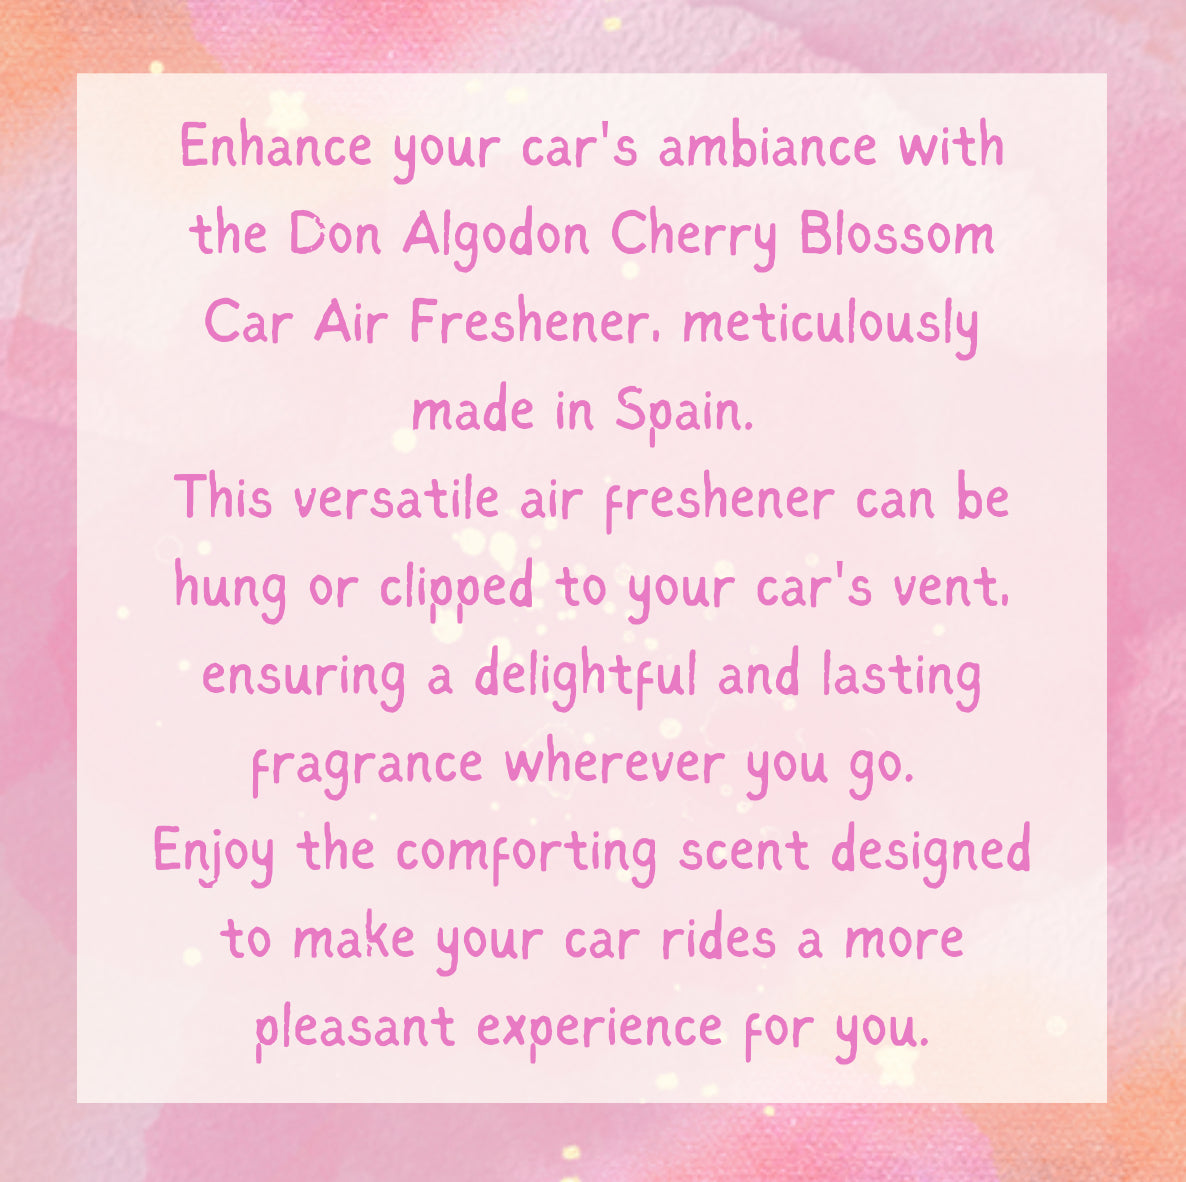 Don Algodon CHERRY BLOSSOM Car Air Freshener Spanish Clean - Spanish Cleaning Products